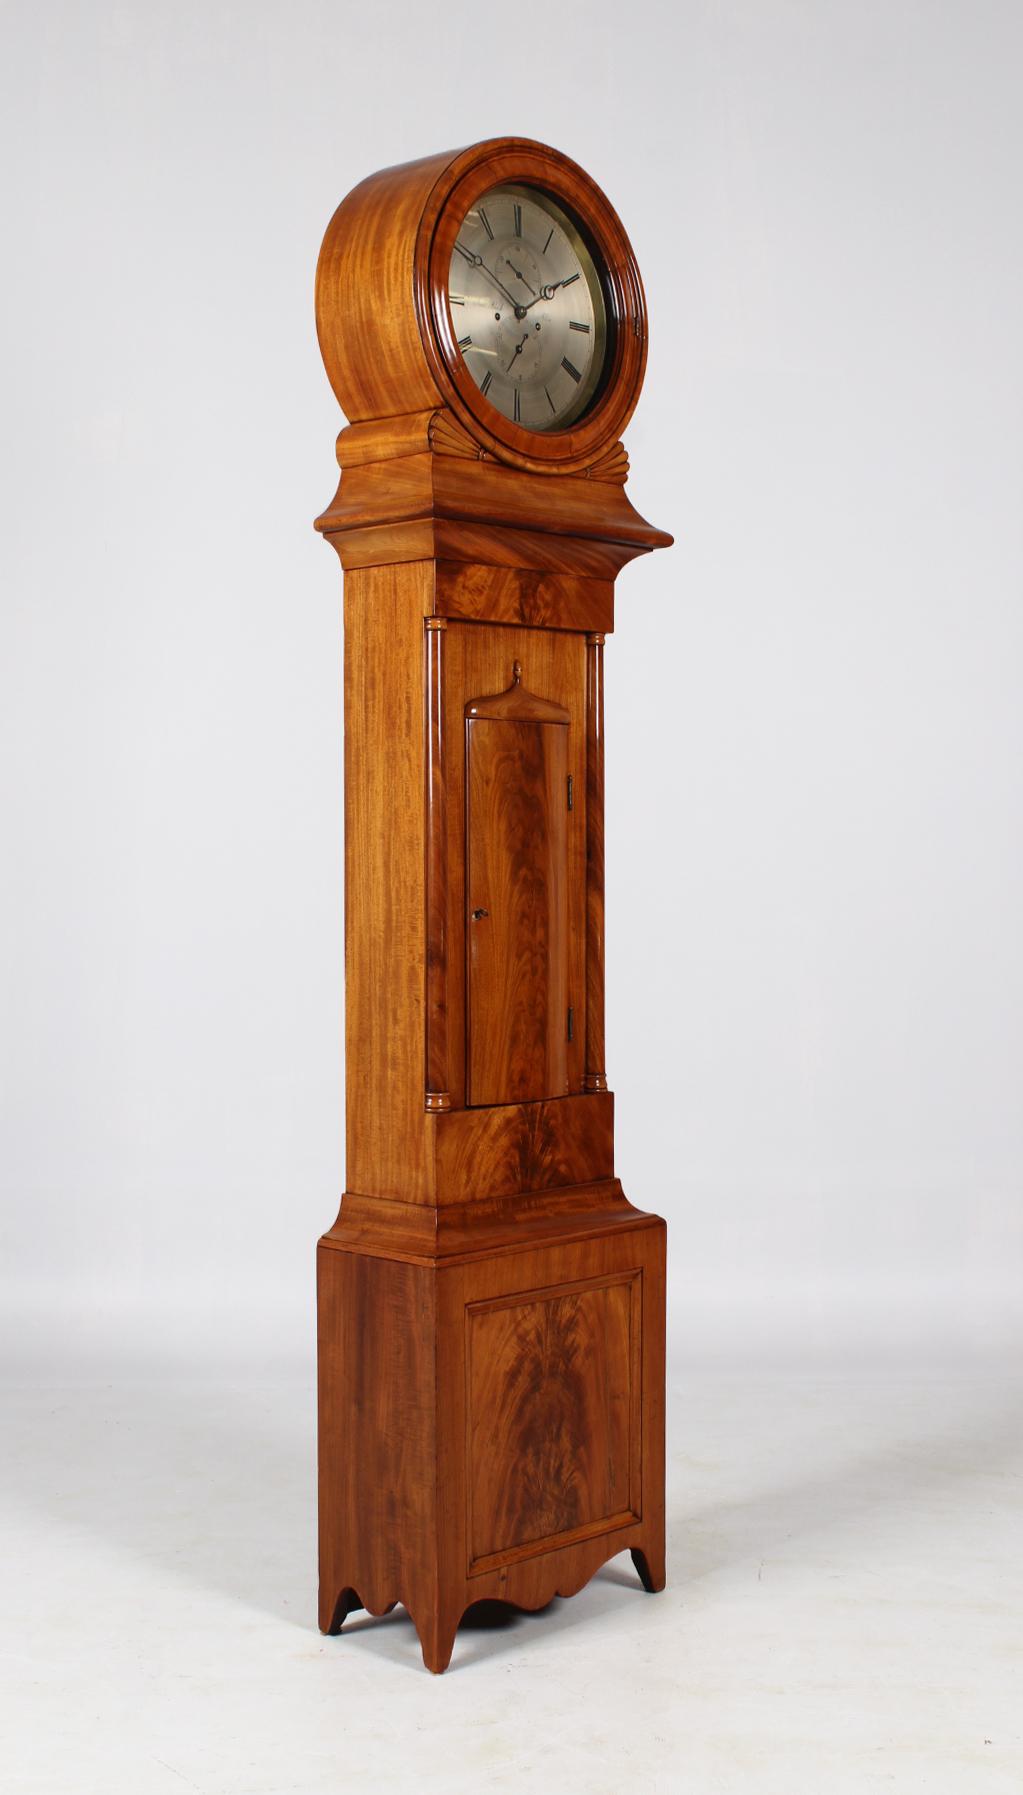 Antique grandfather clock

Scotland
Mahogany
Victorian around 1835

Dimensions: H x W x D: 208 cm x 46 x 24 cm

Description:
Slender clock case standing on graceful cut-out feet.
Bleached plain mahogany wood with beautiful grain.
To the